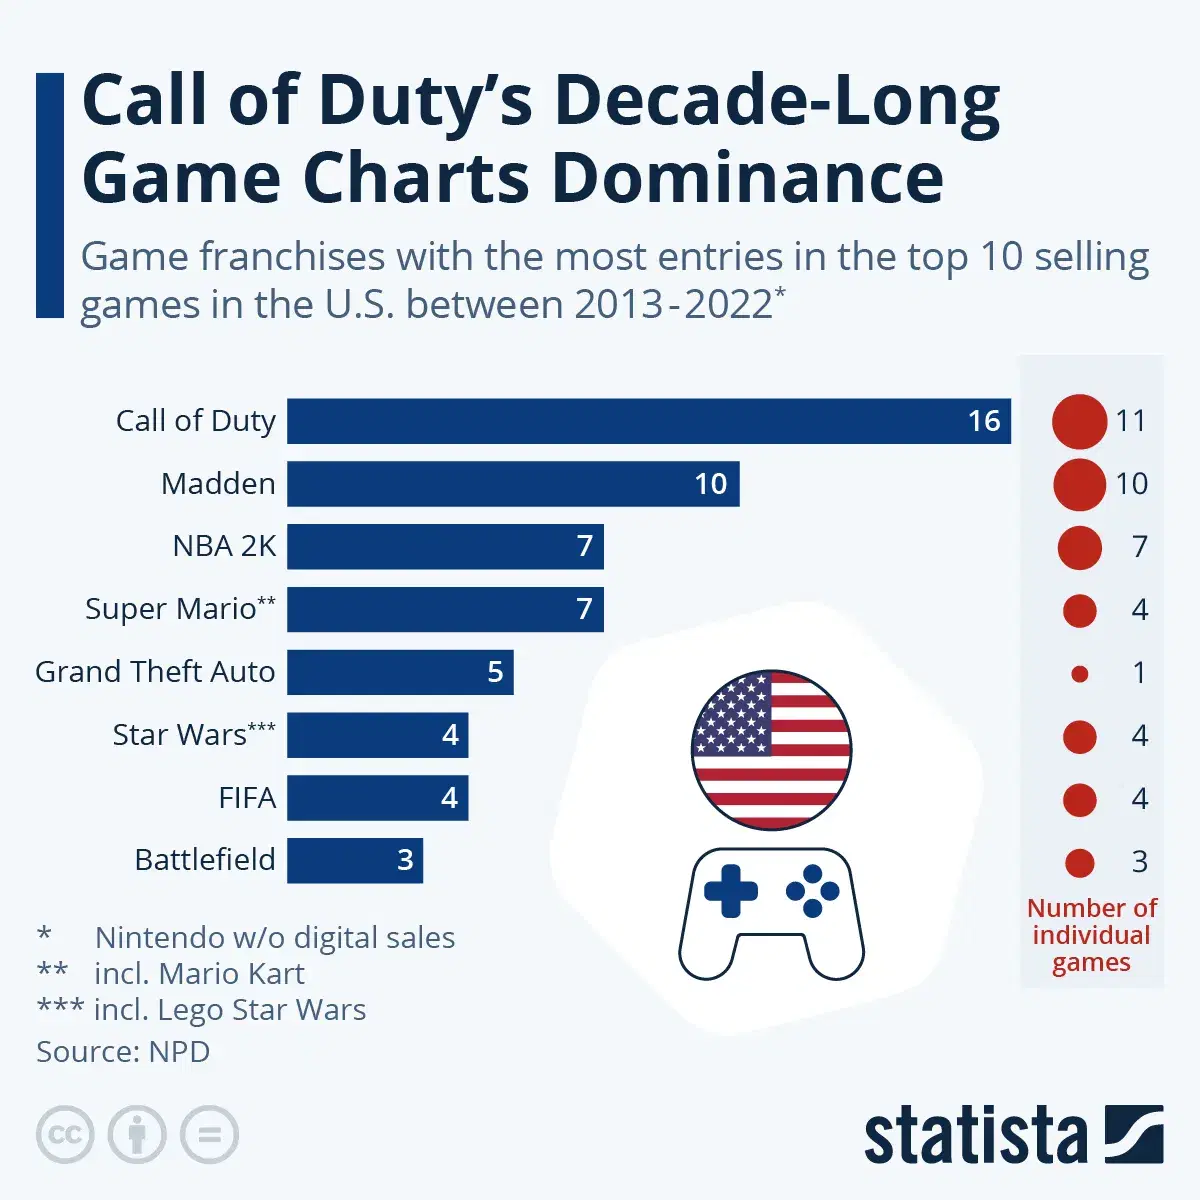 What Are The Best Selling Video Game Franchises In the U.S.?